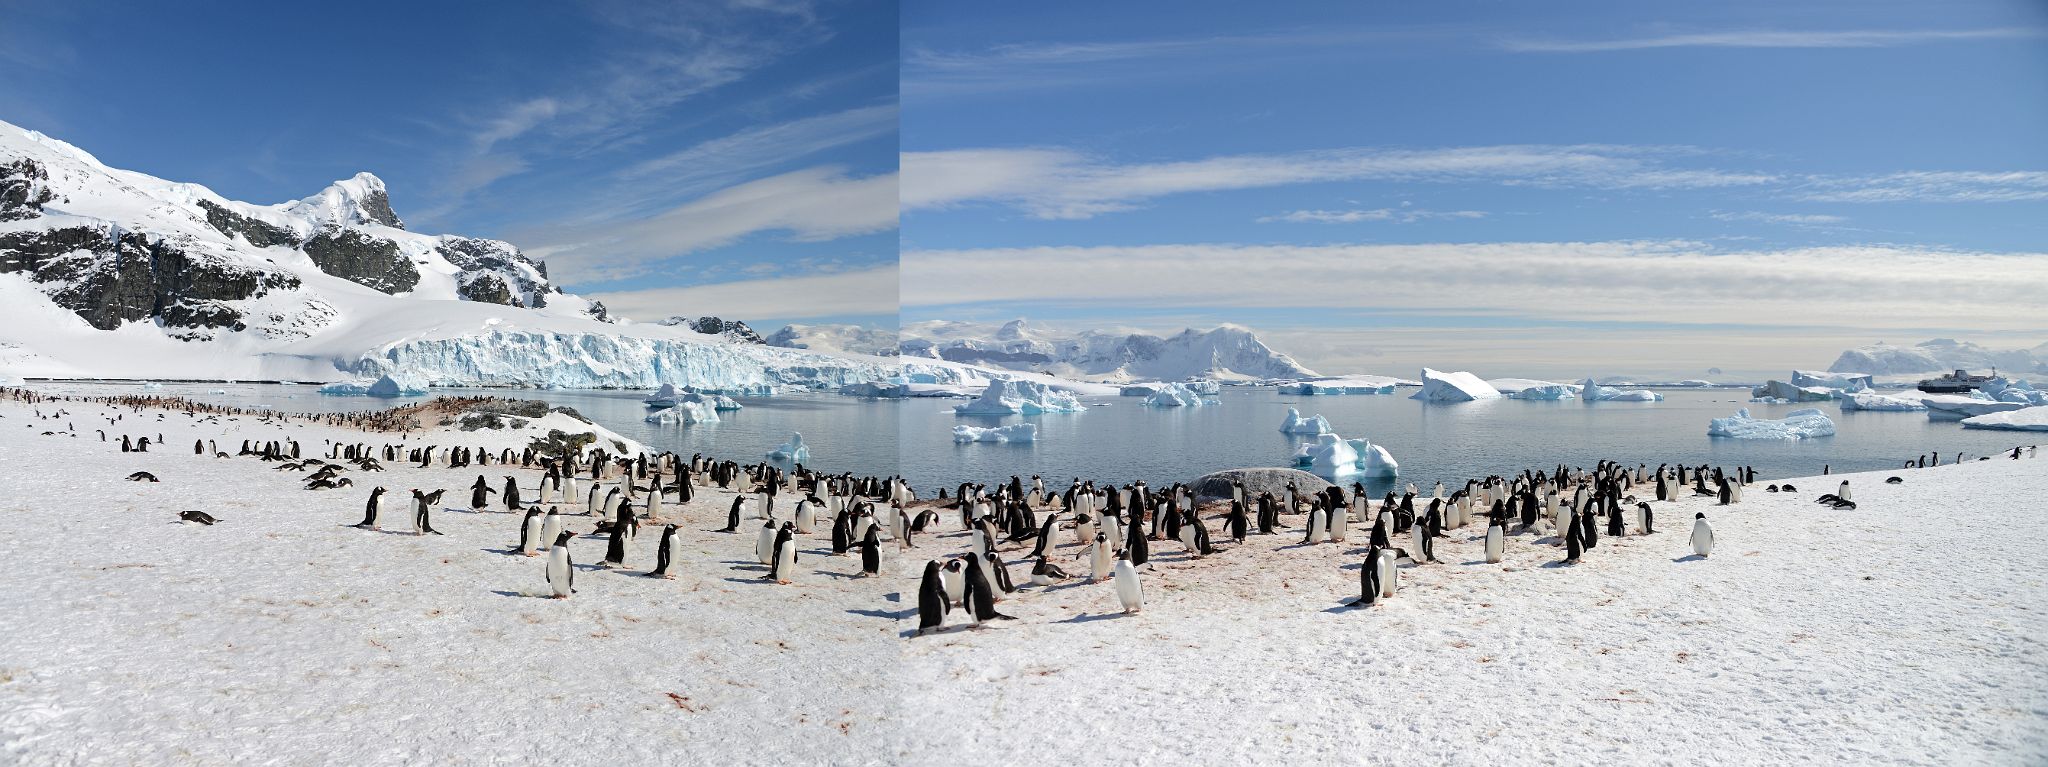 22D Panoramic View Of Gentoo Penguins On Cuverville Island With Mount Tennant, Anvers Island And Brabant Island On Quark Expeditions Antarctica Cruise